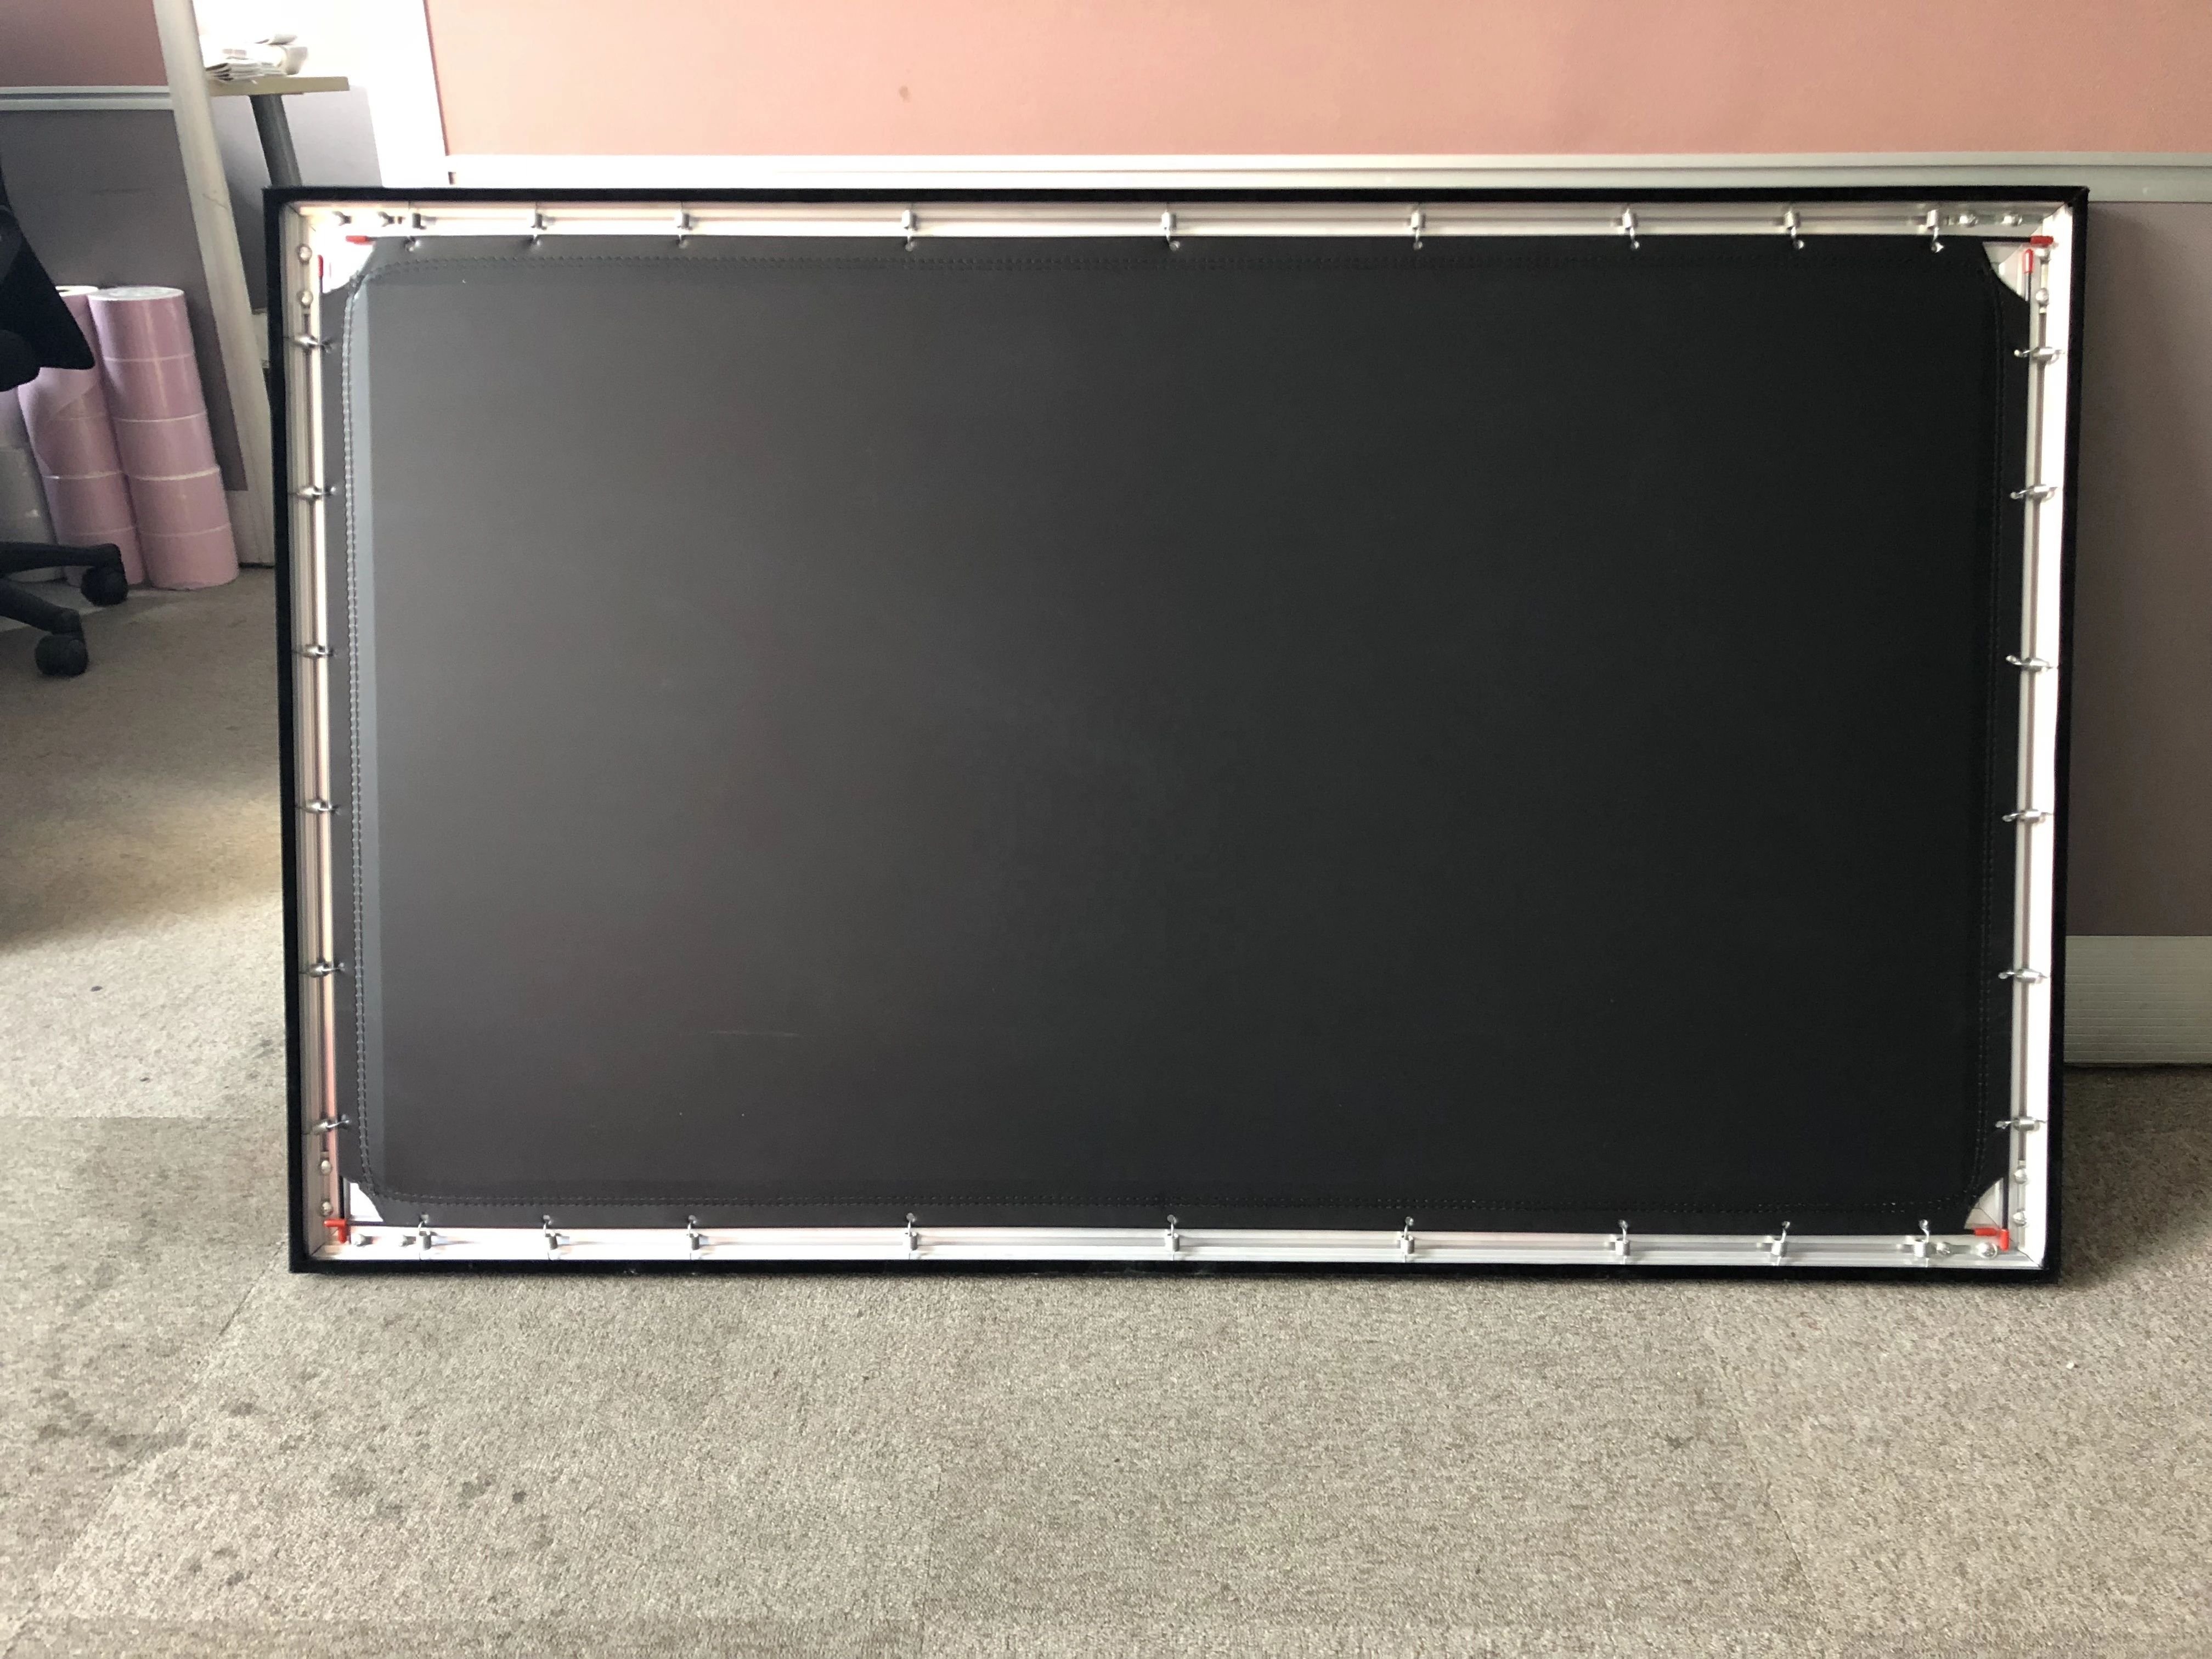 Frame projection screen / projection equipment